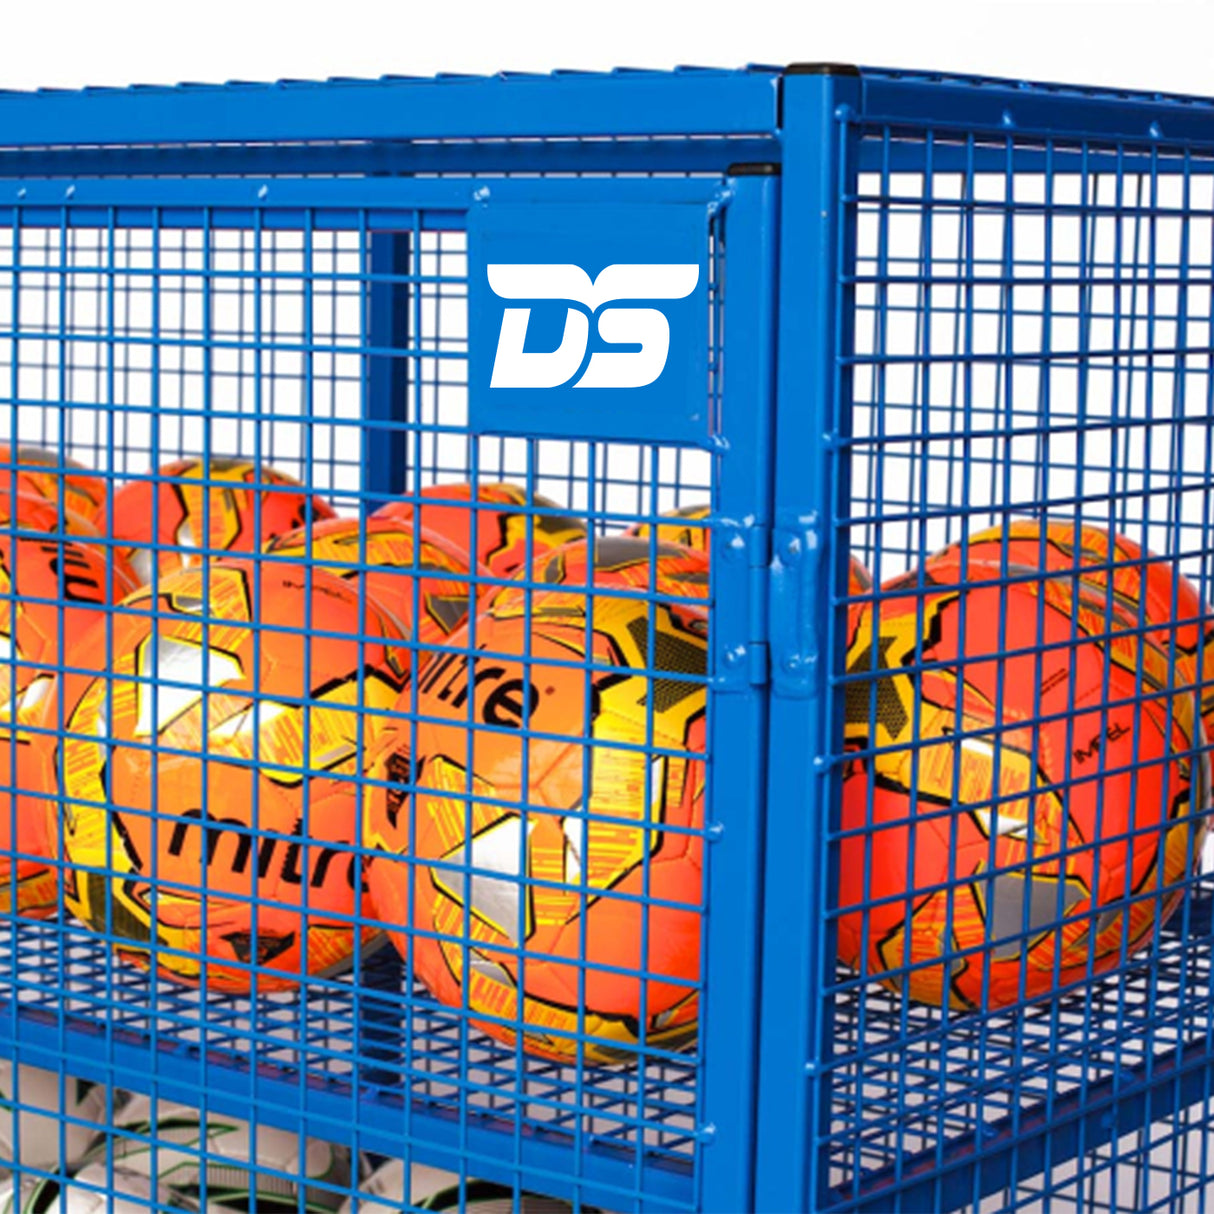 Deluxe Storage Shelving Cage